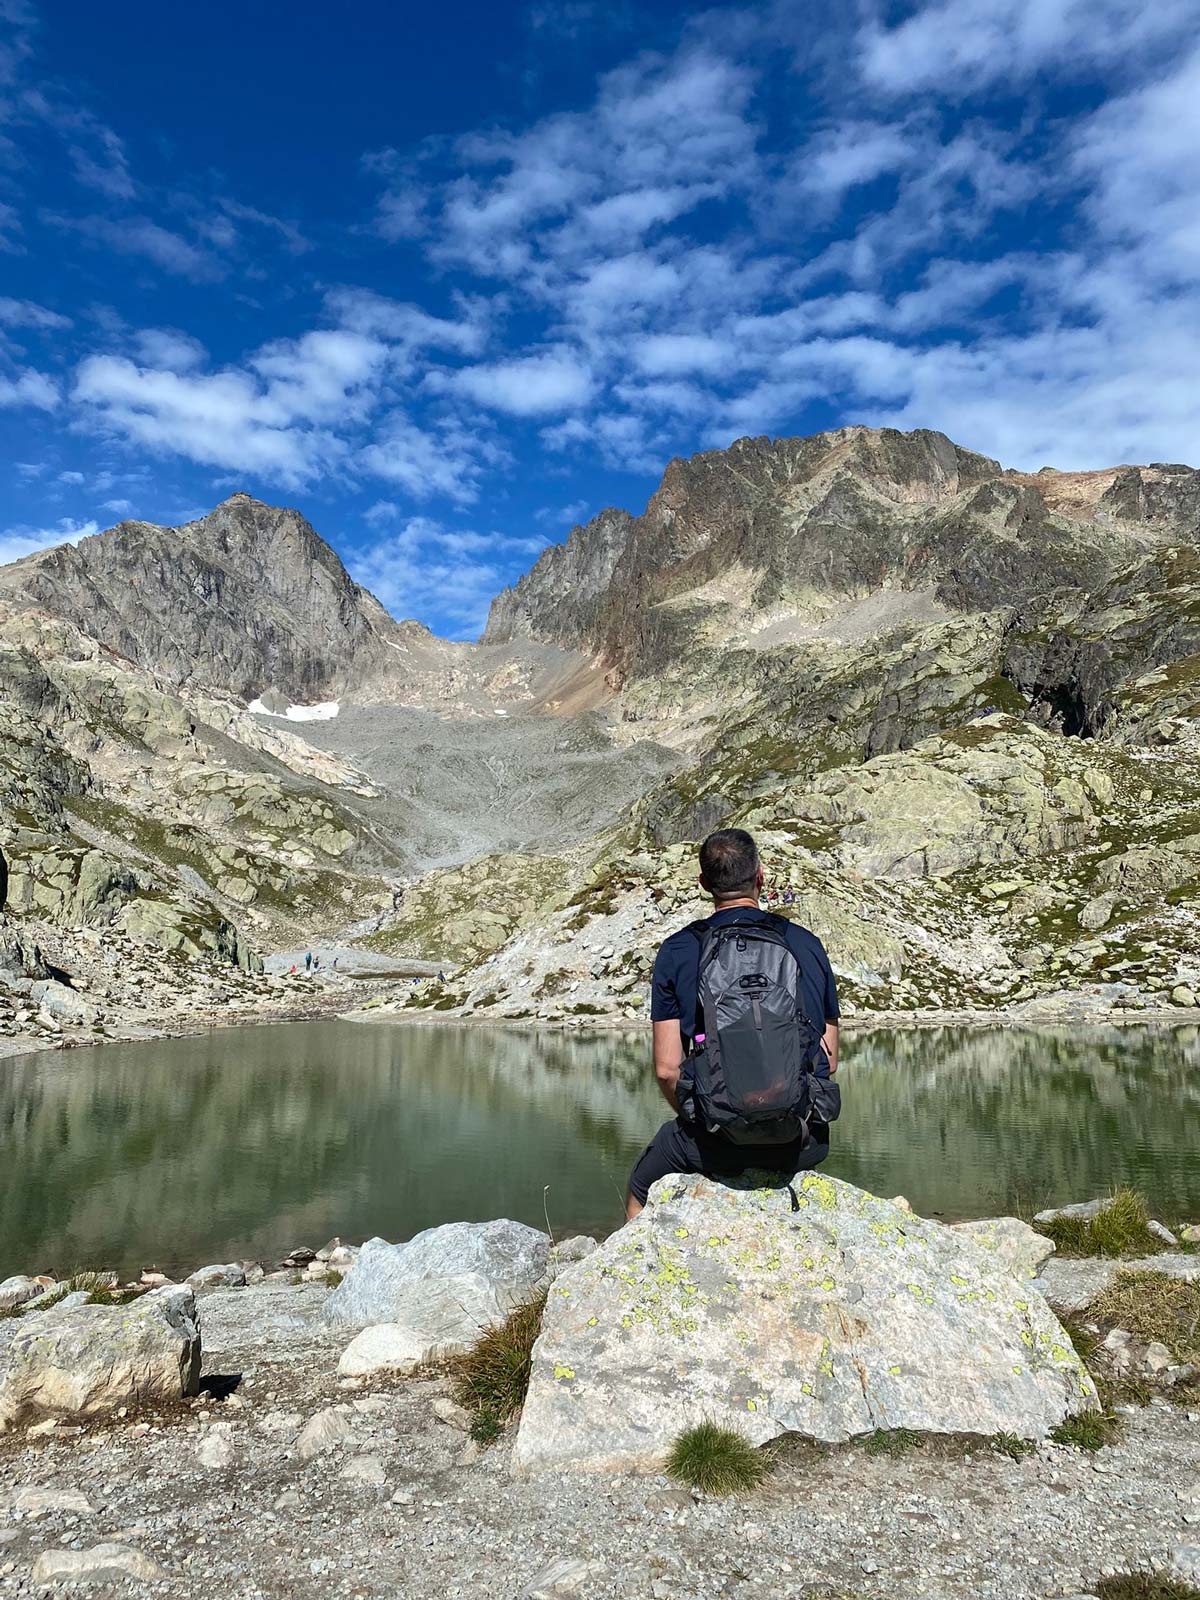 A person looking at the Lac Blanc